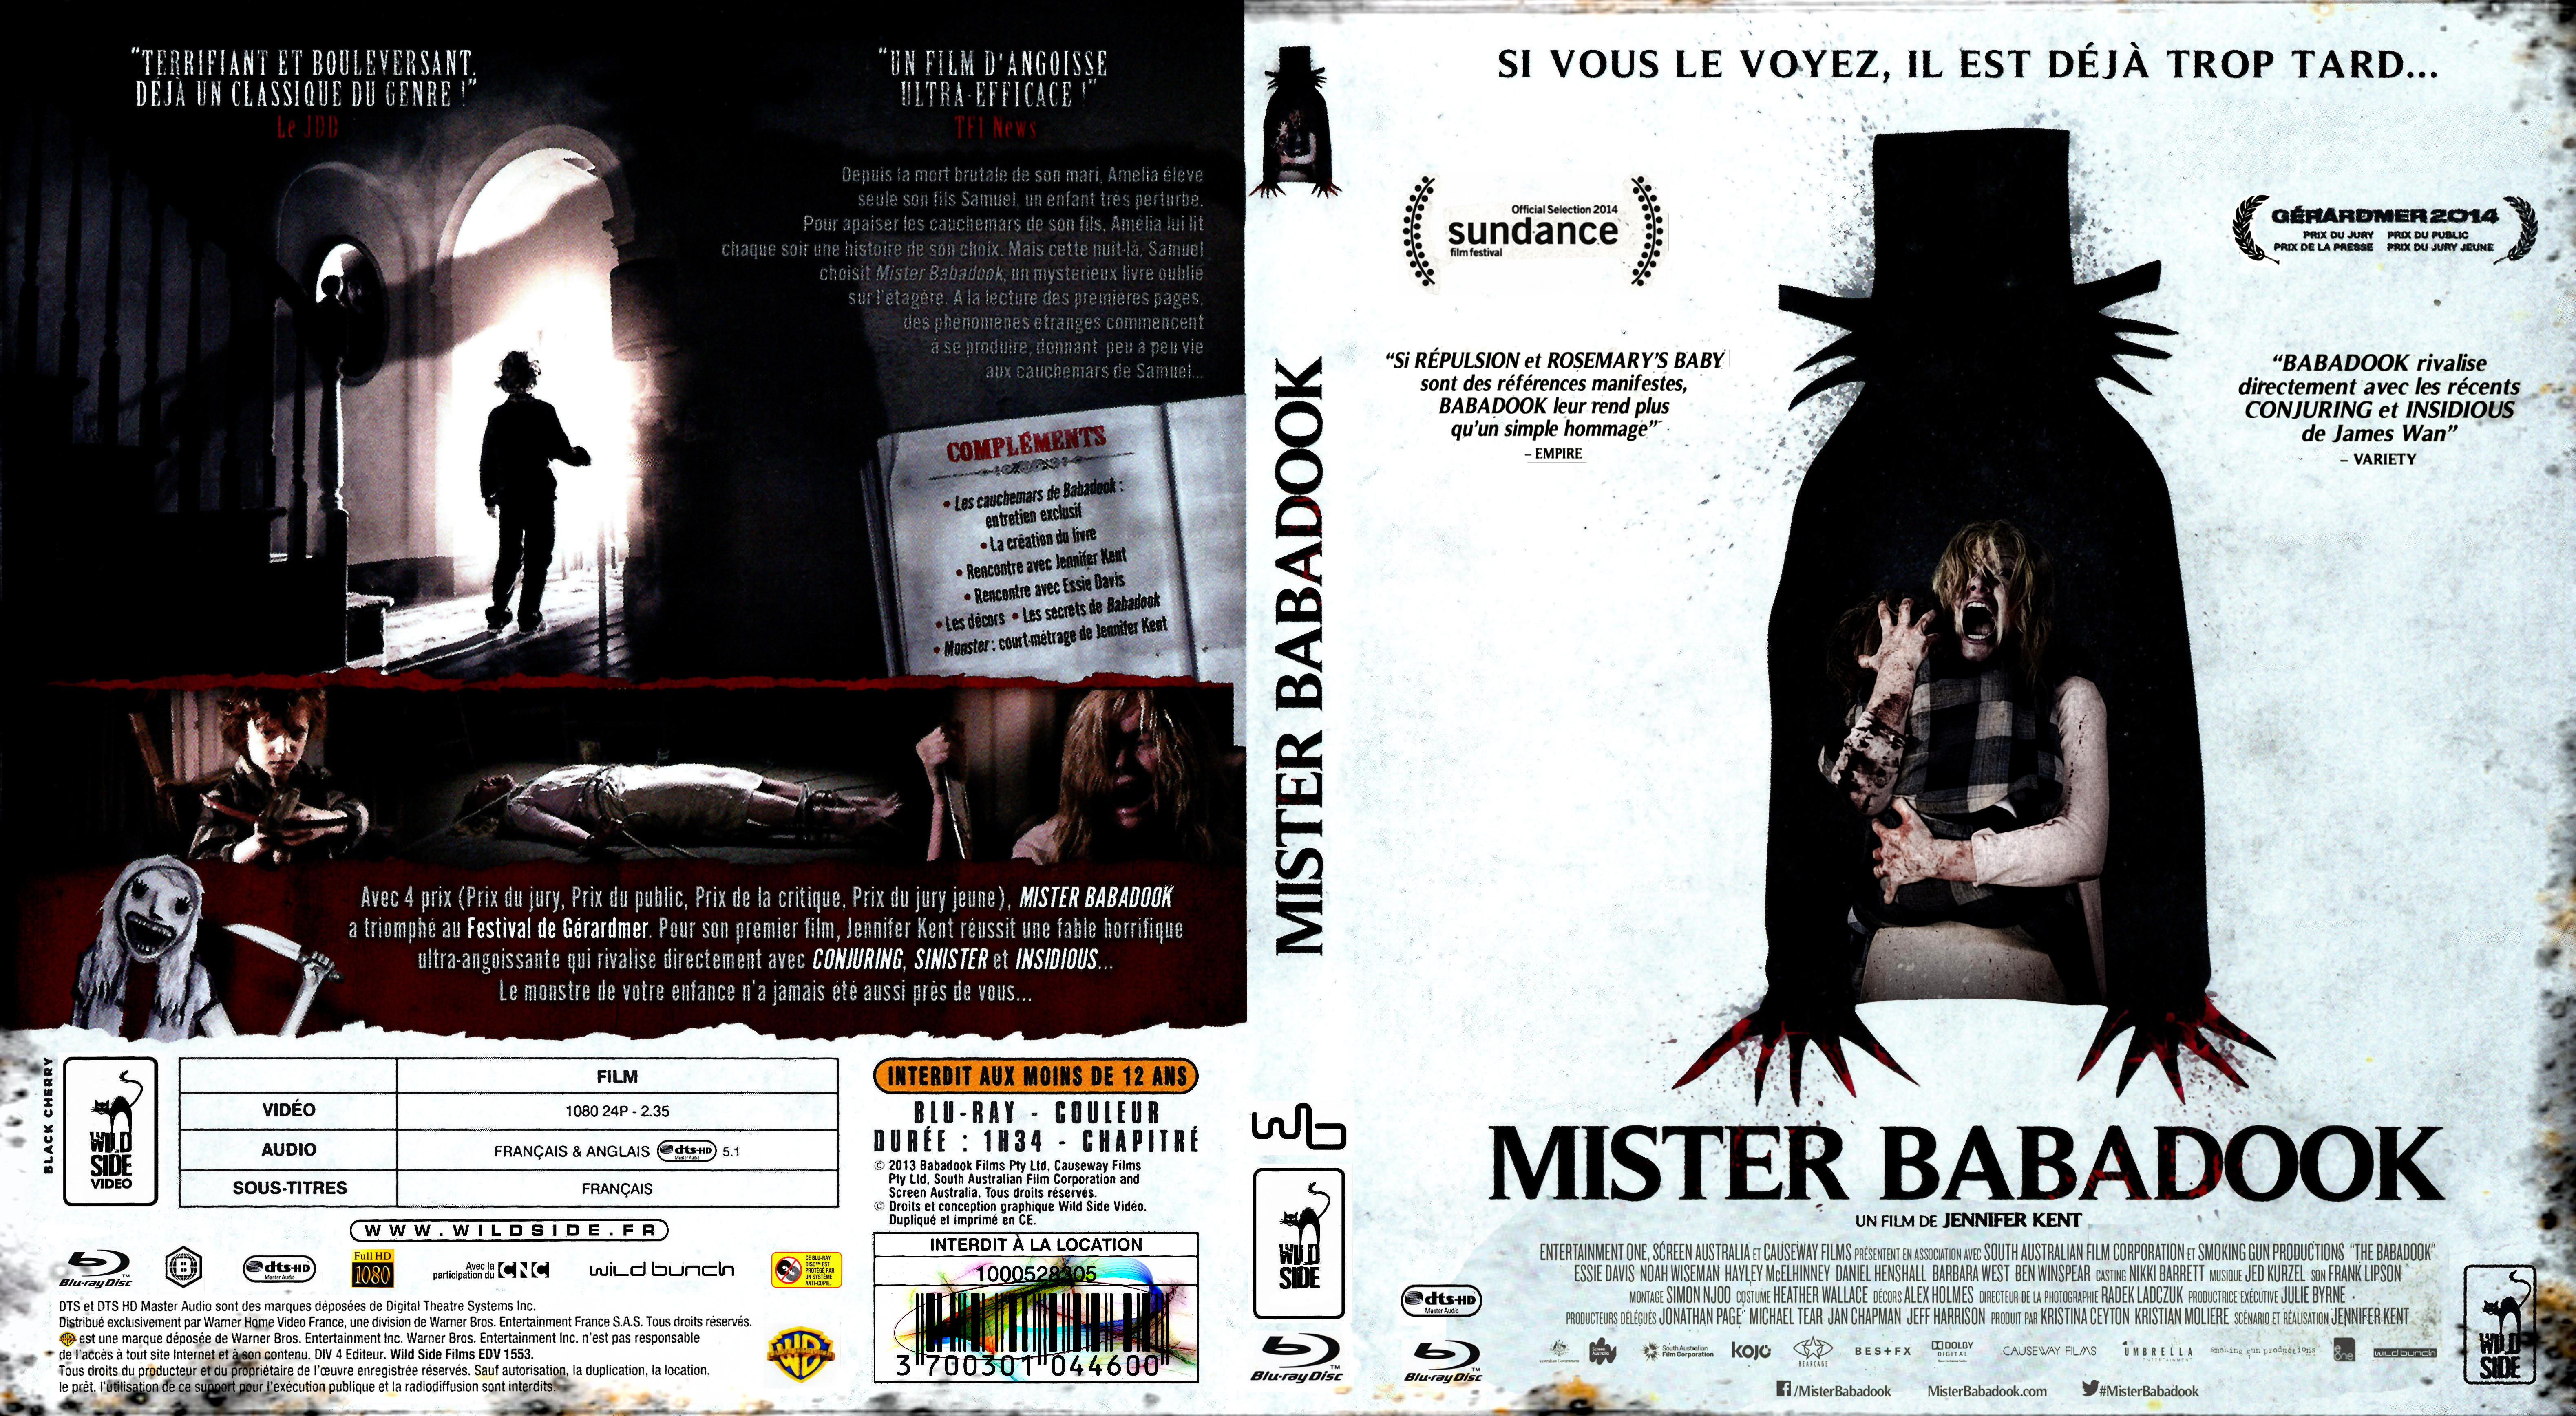 Jaquette DVD Mister babadook (BLU-RAY)